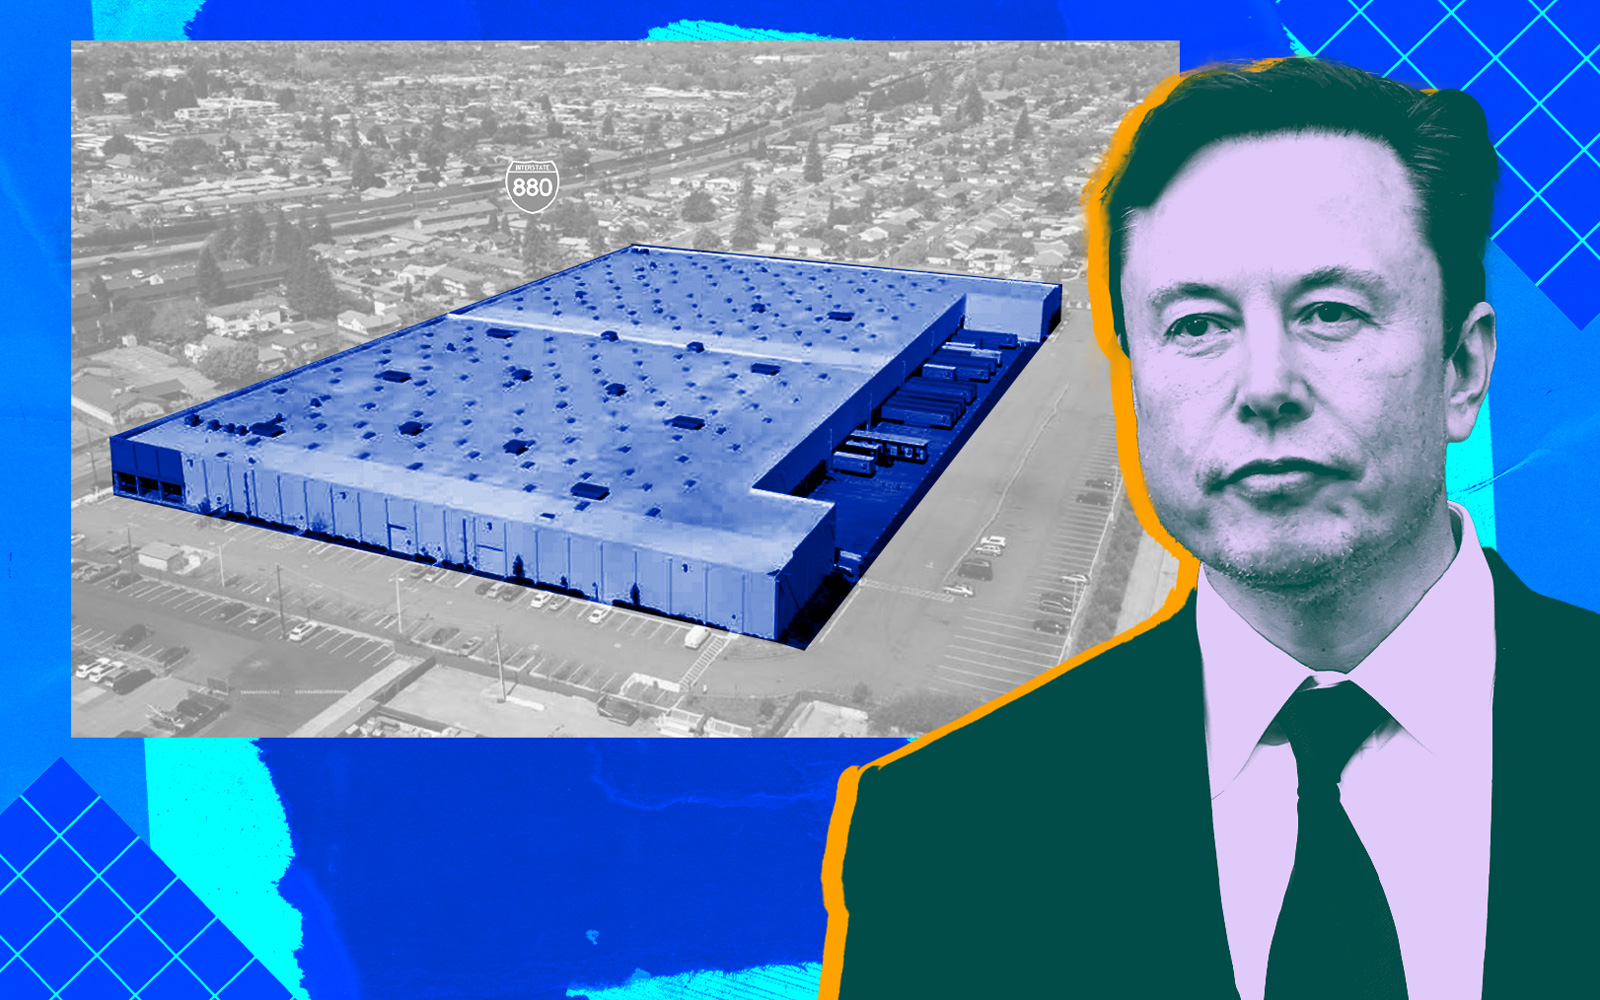 Tesla leases 149K sf at a distribution warehouse in Hayward